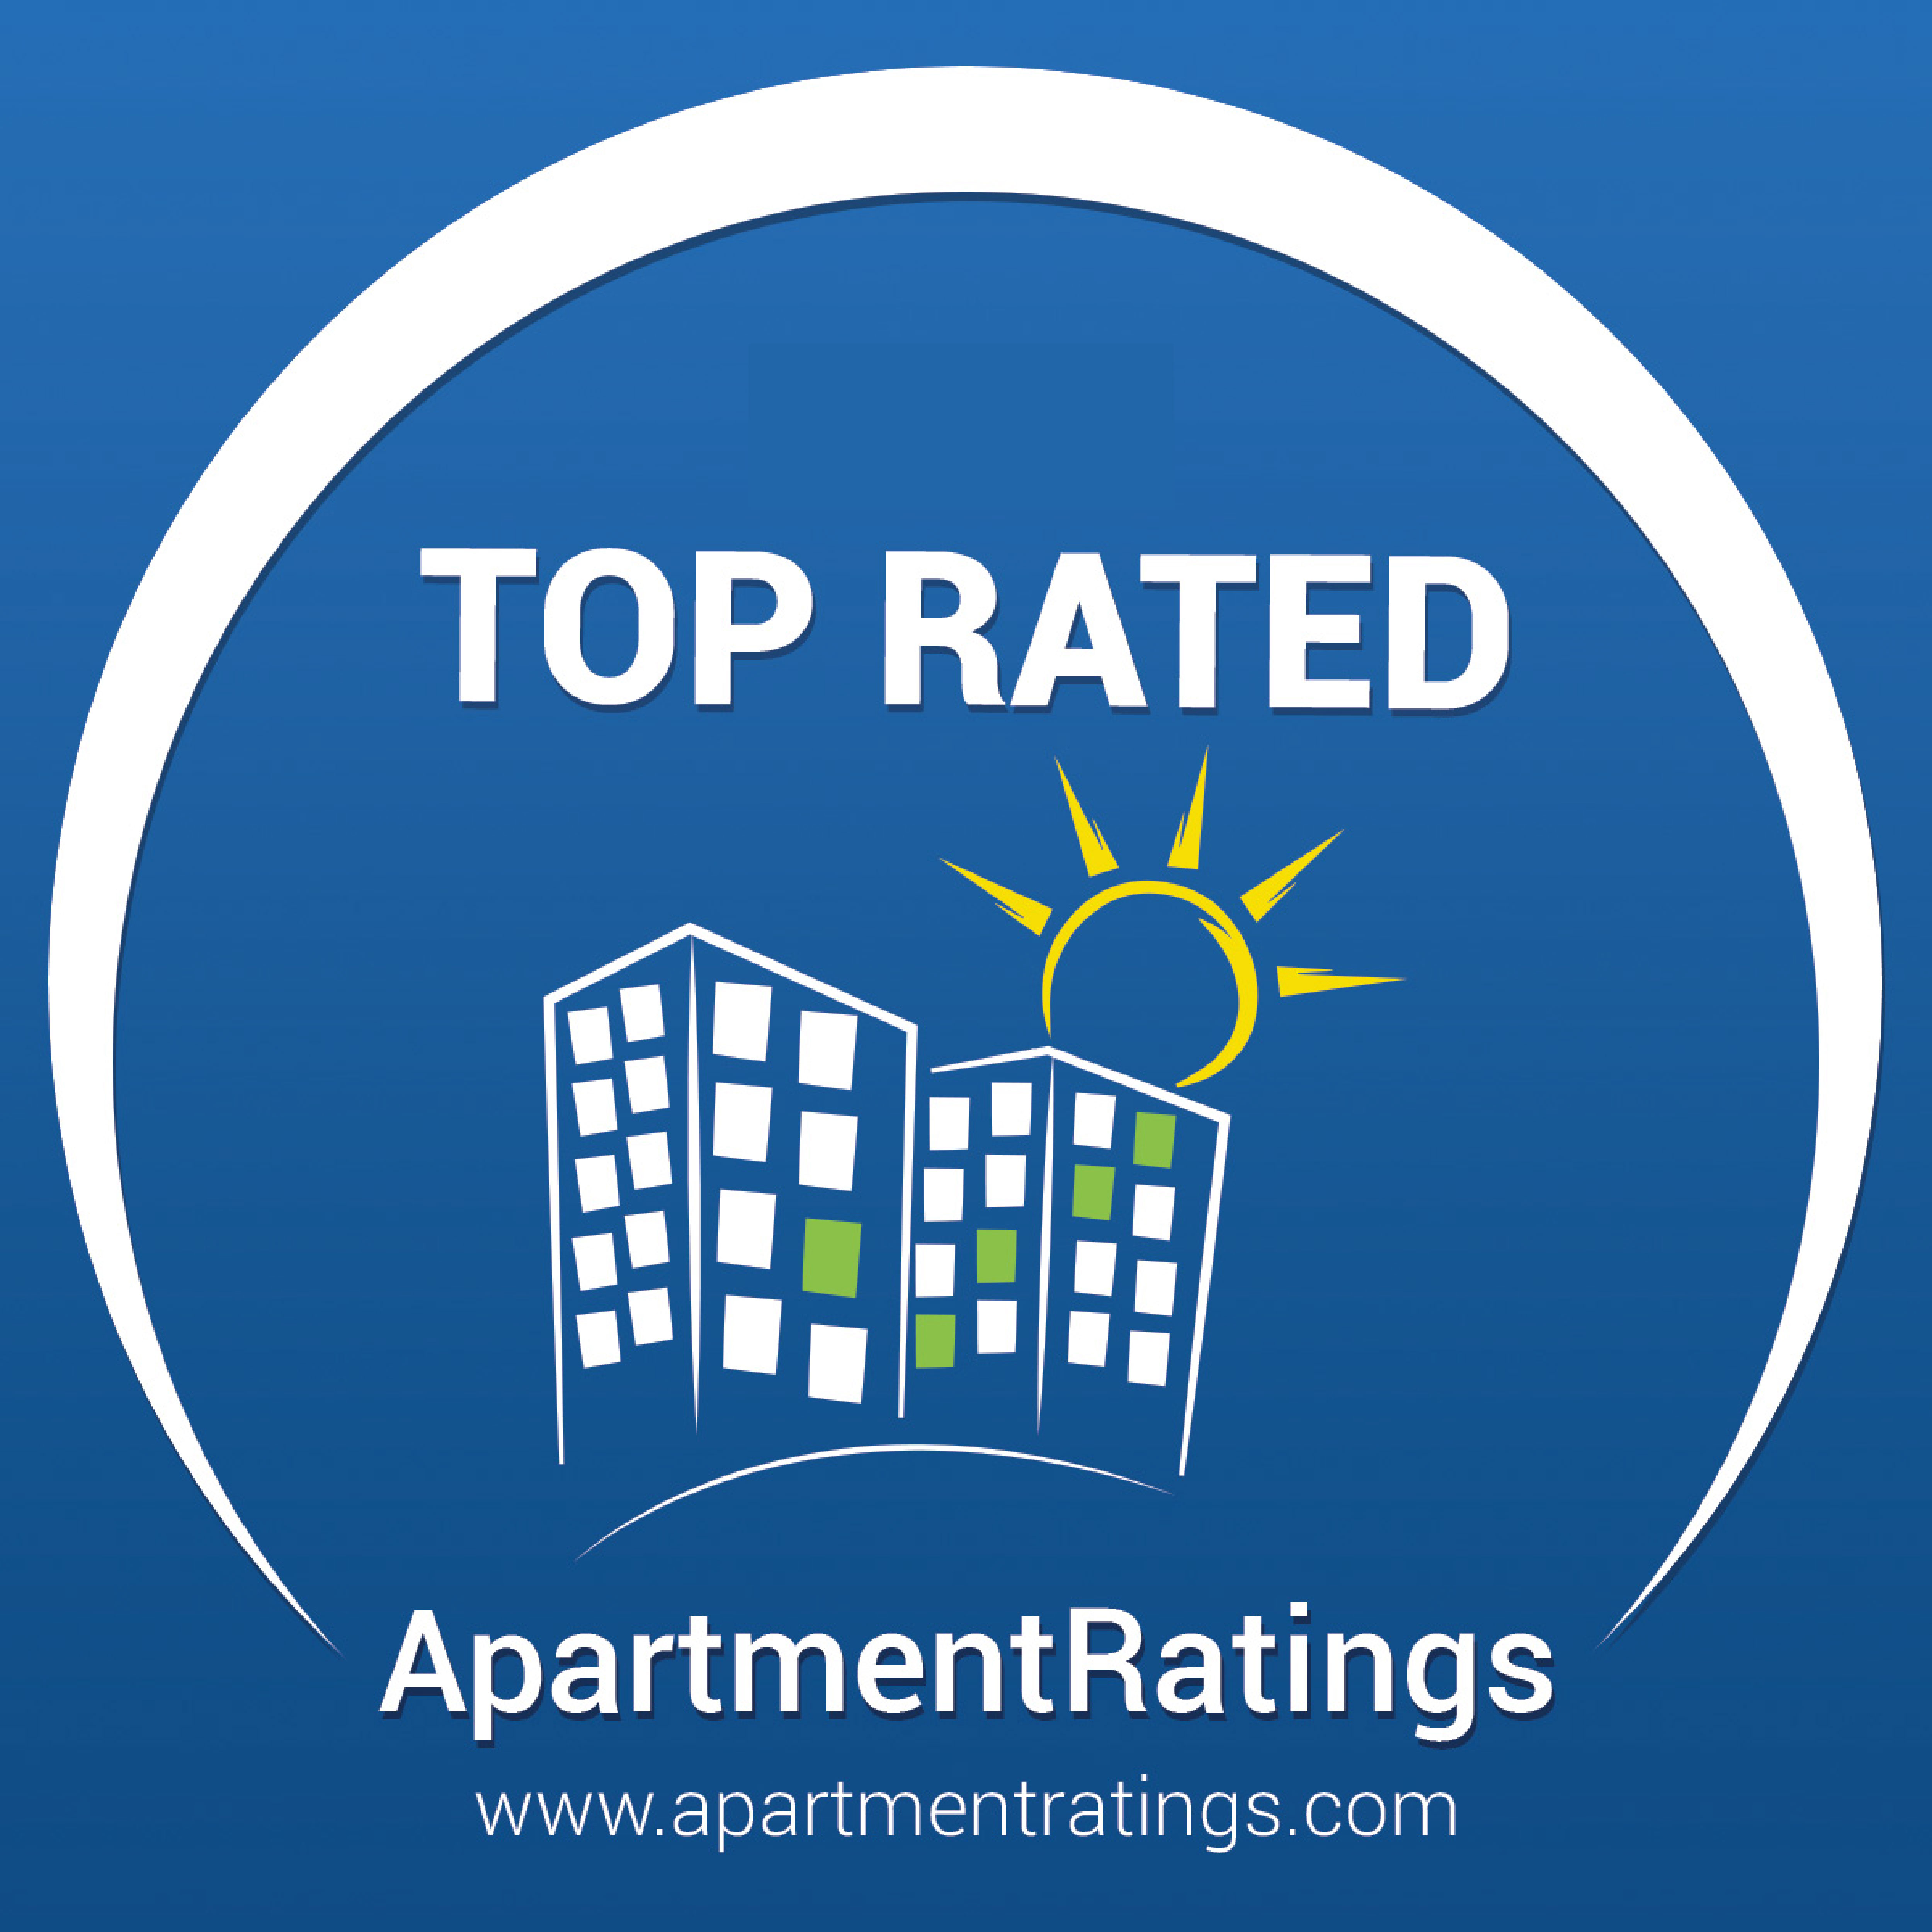 top rated apartmentratings.com 